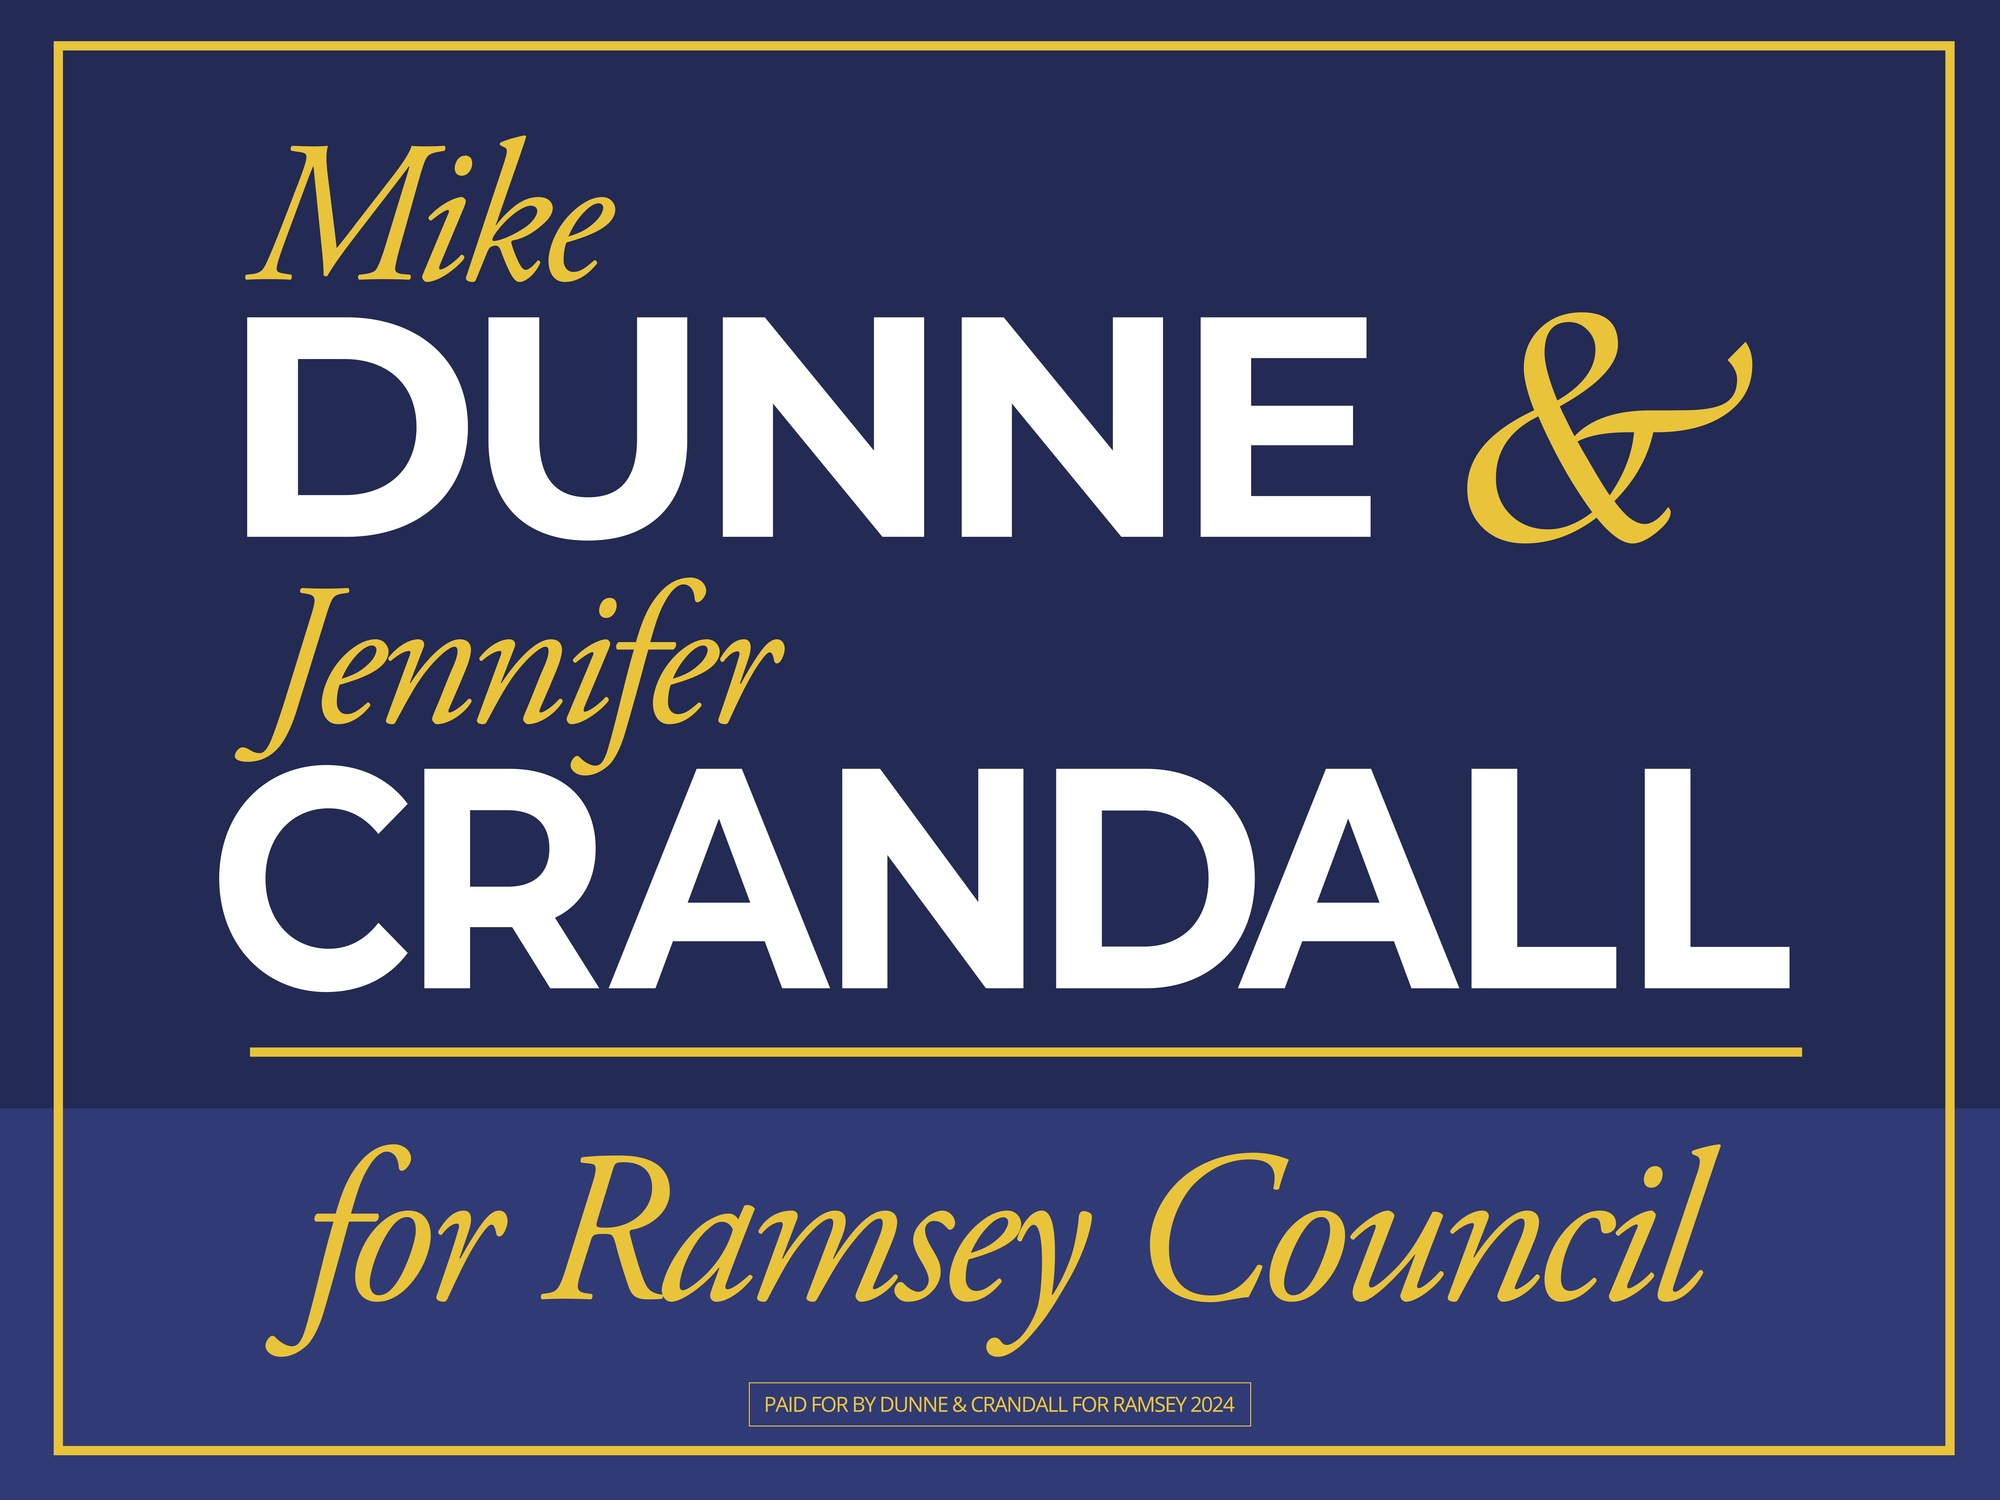 Mike Dunne & Jennifer Crandall for Ramsey Council